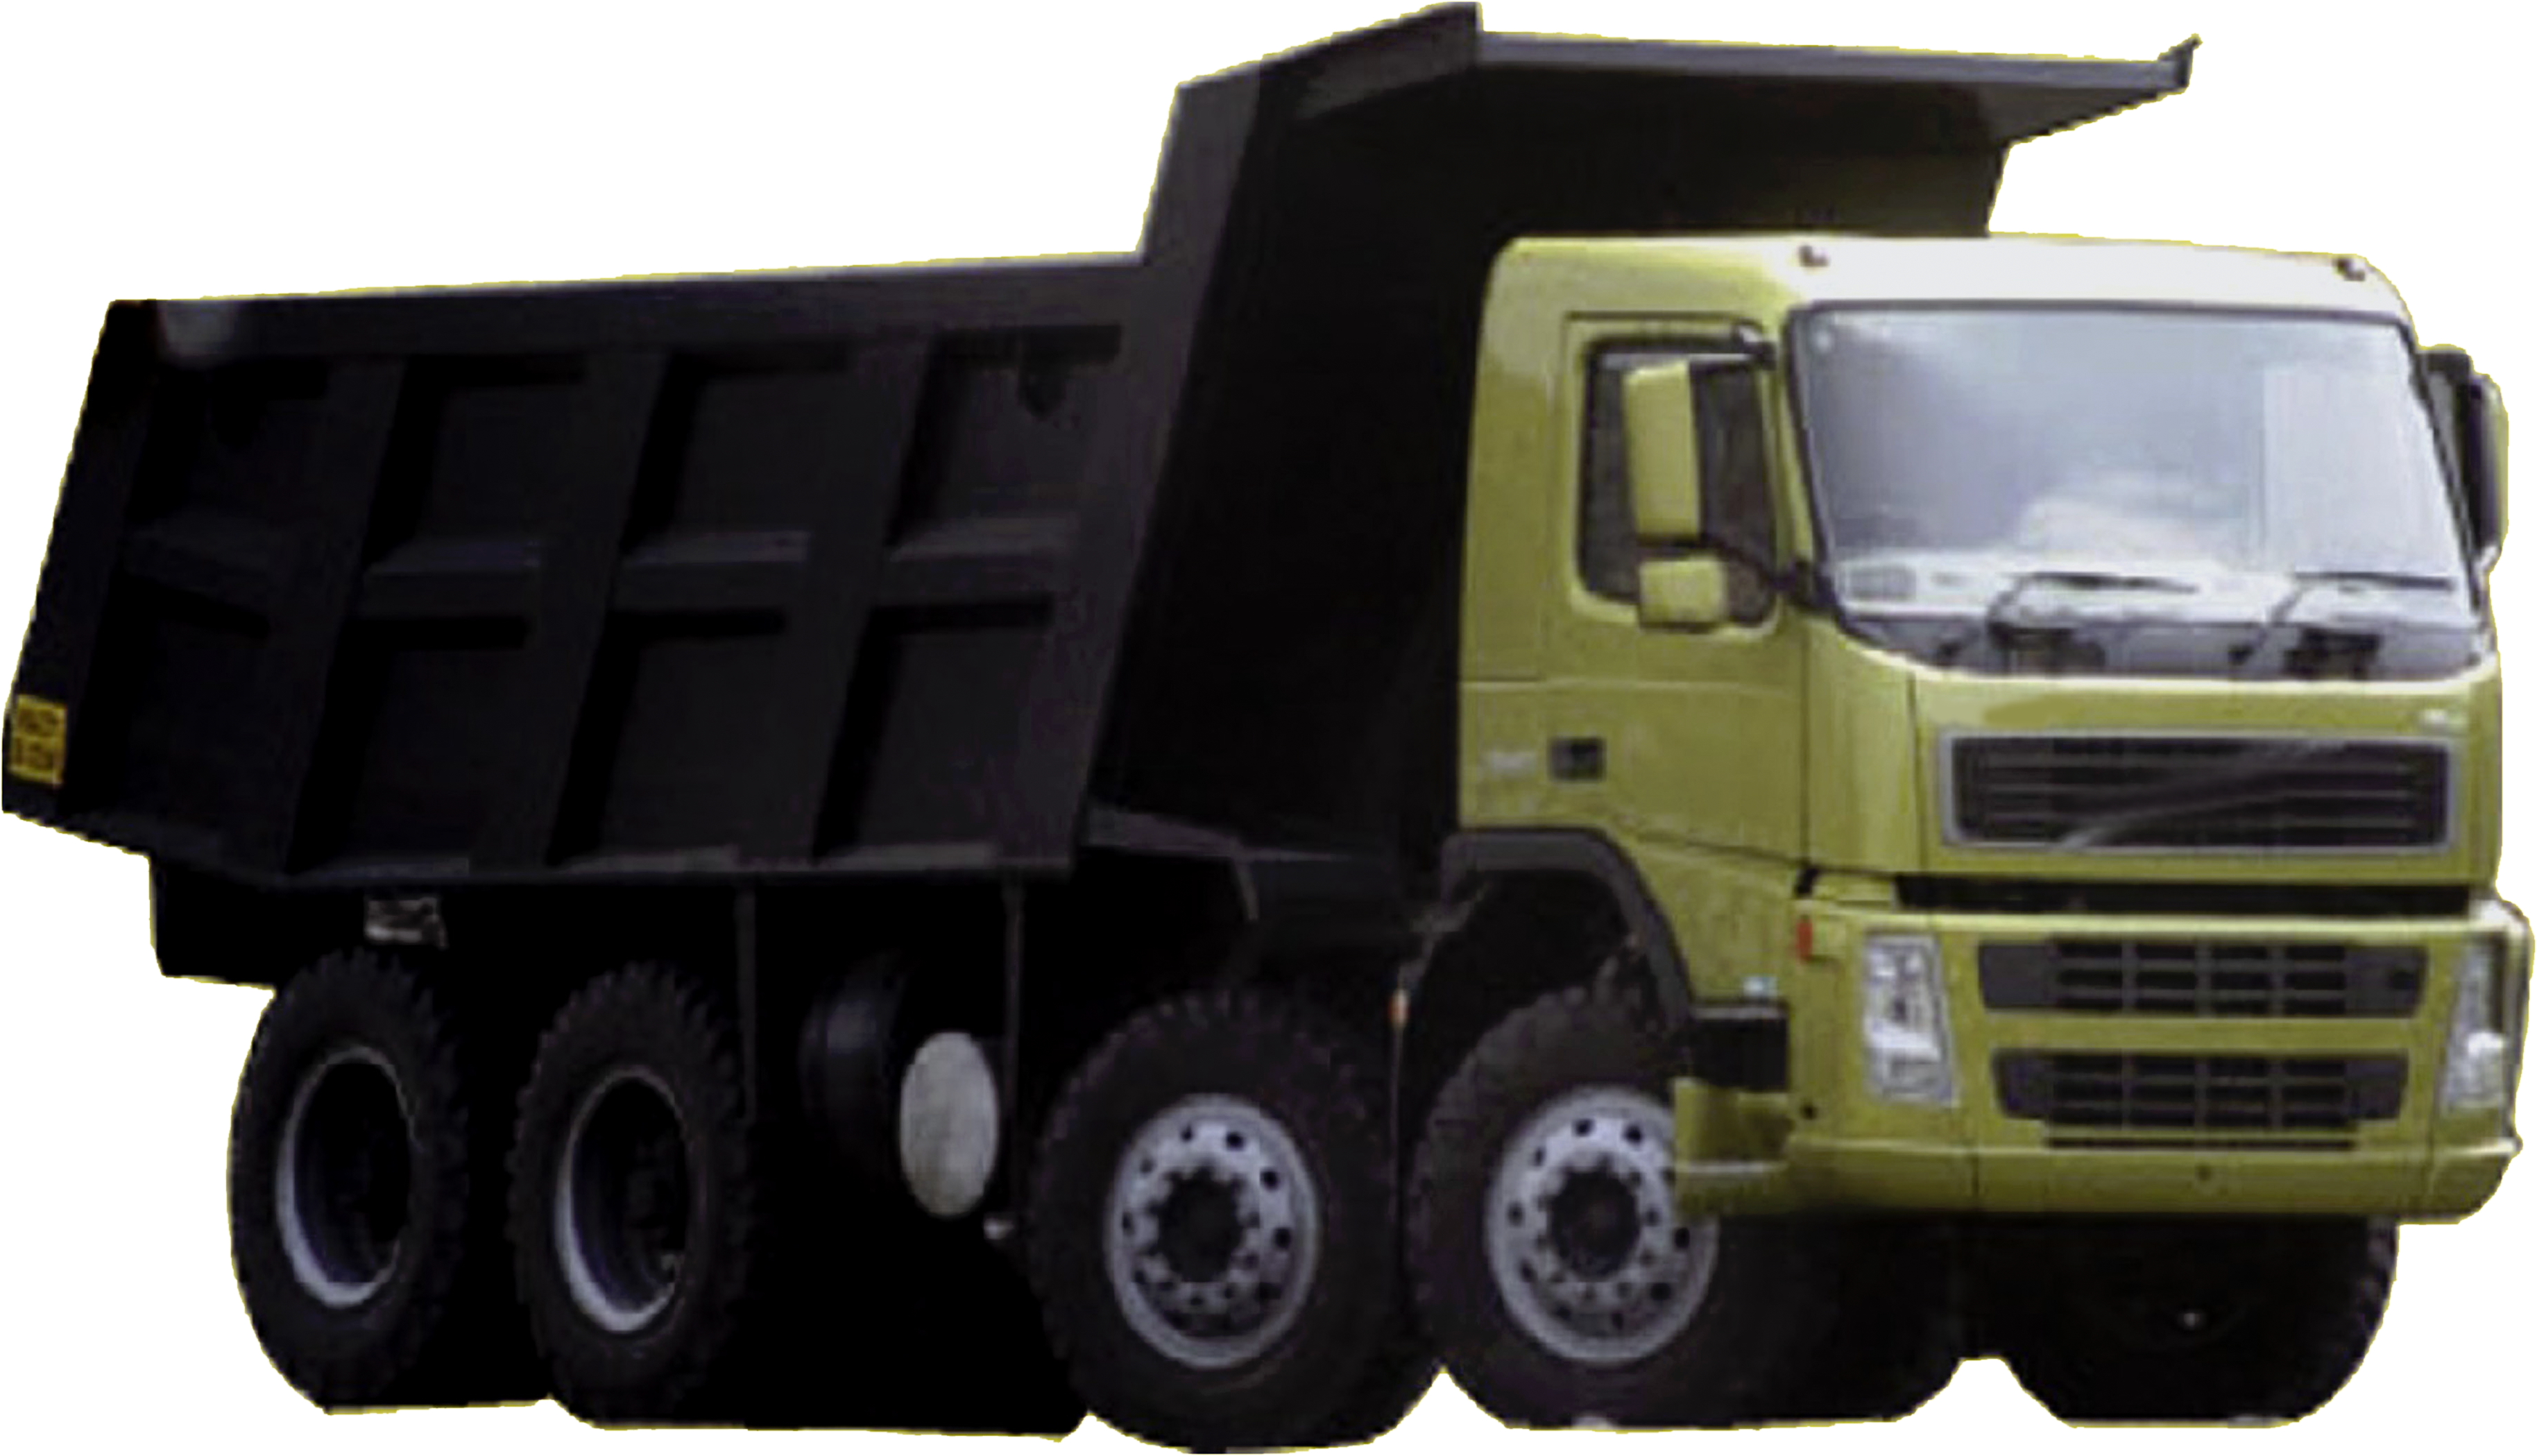 A Green Dump Truck With A Black Background